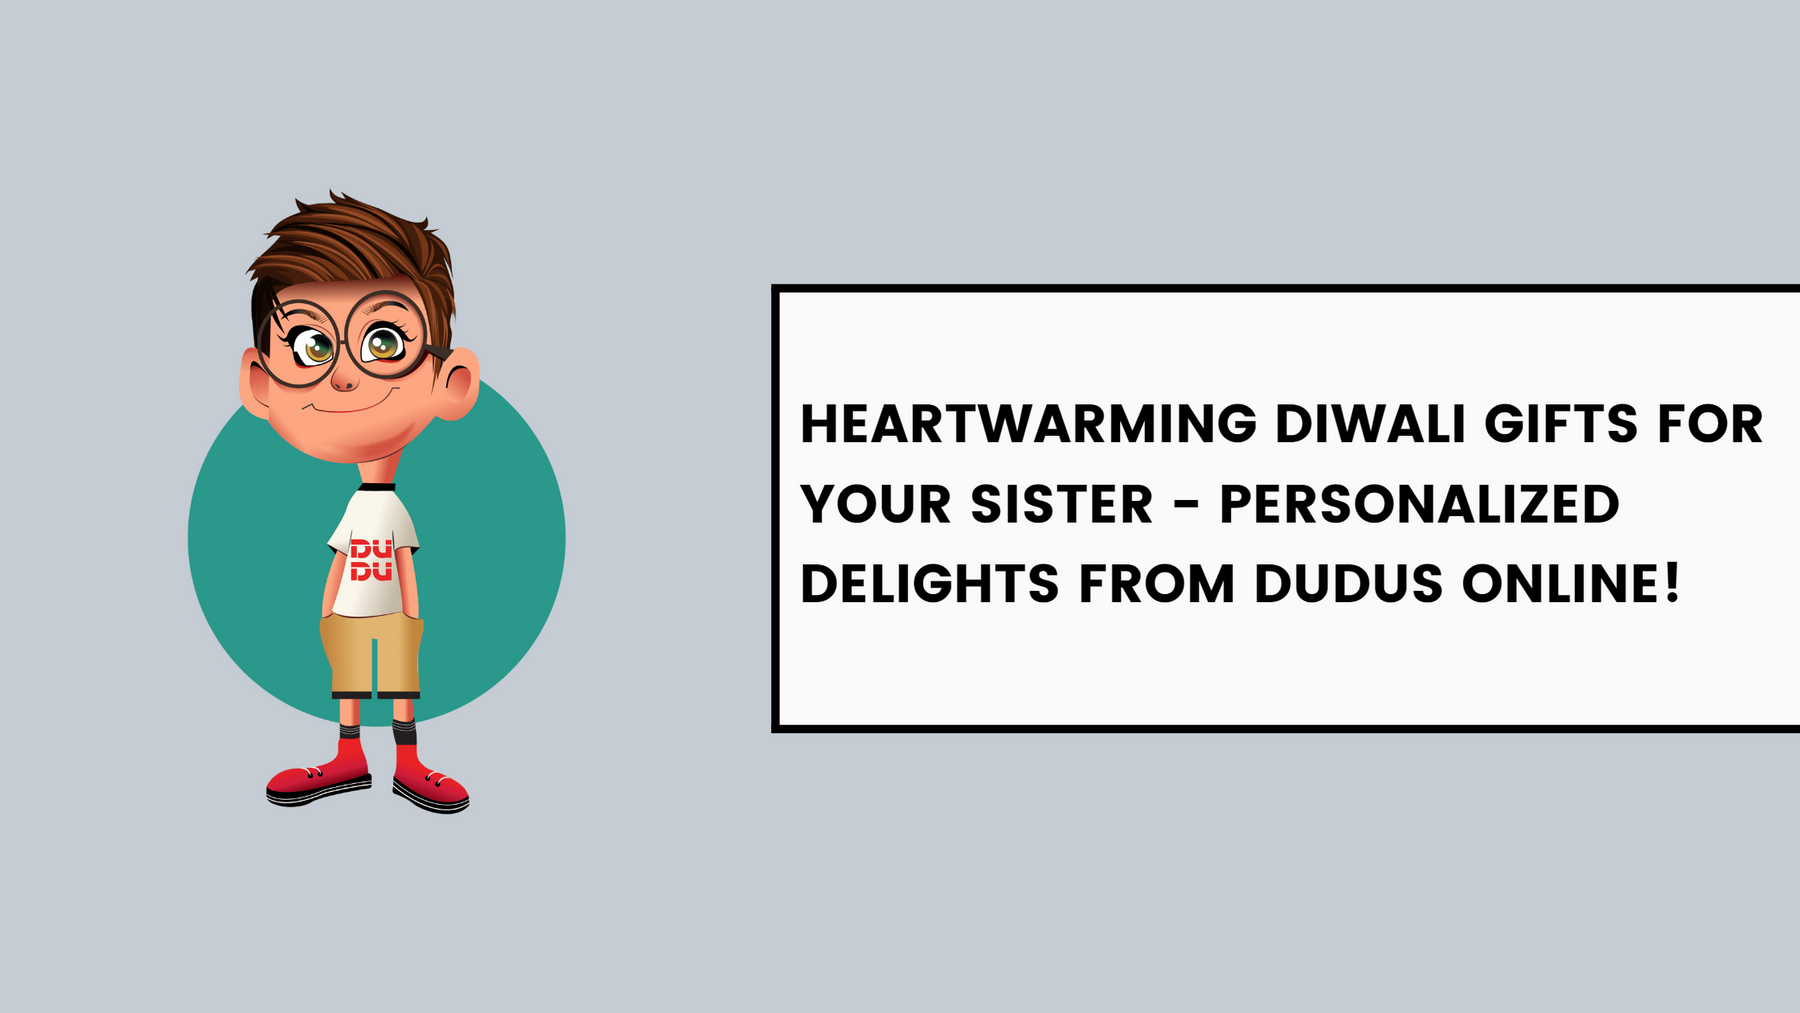 Heartwarming Diwali Gifts for Your Sister - Personalized Delights from Dudus Online!